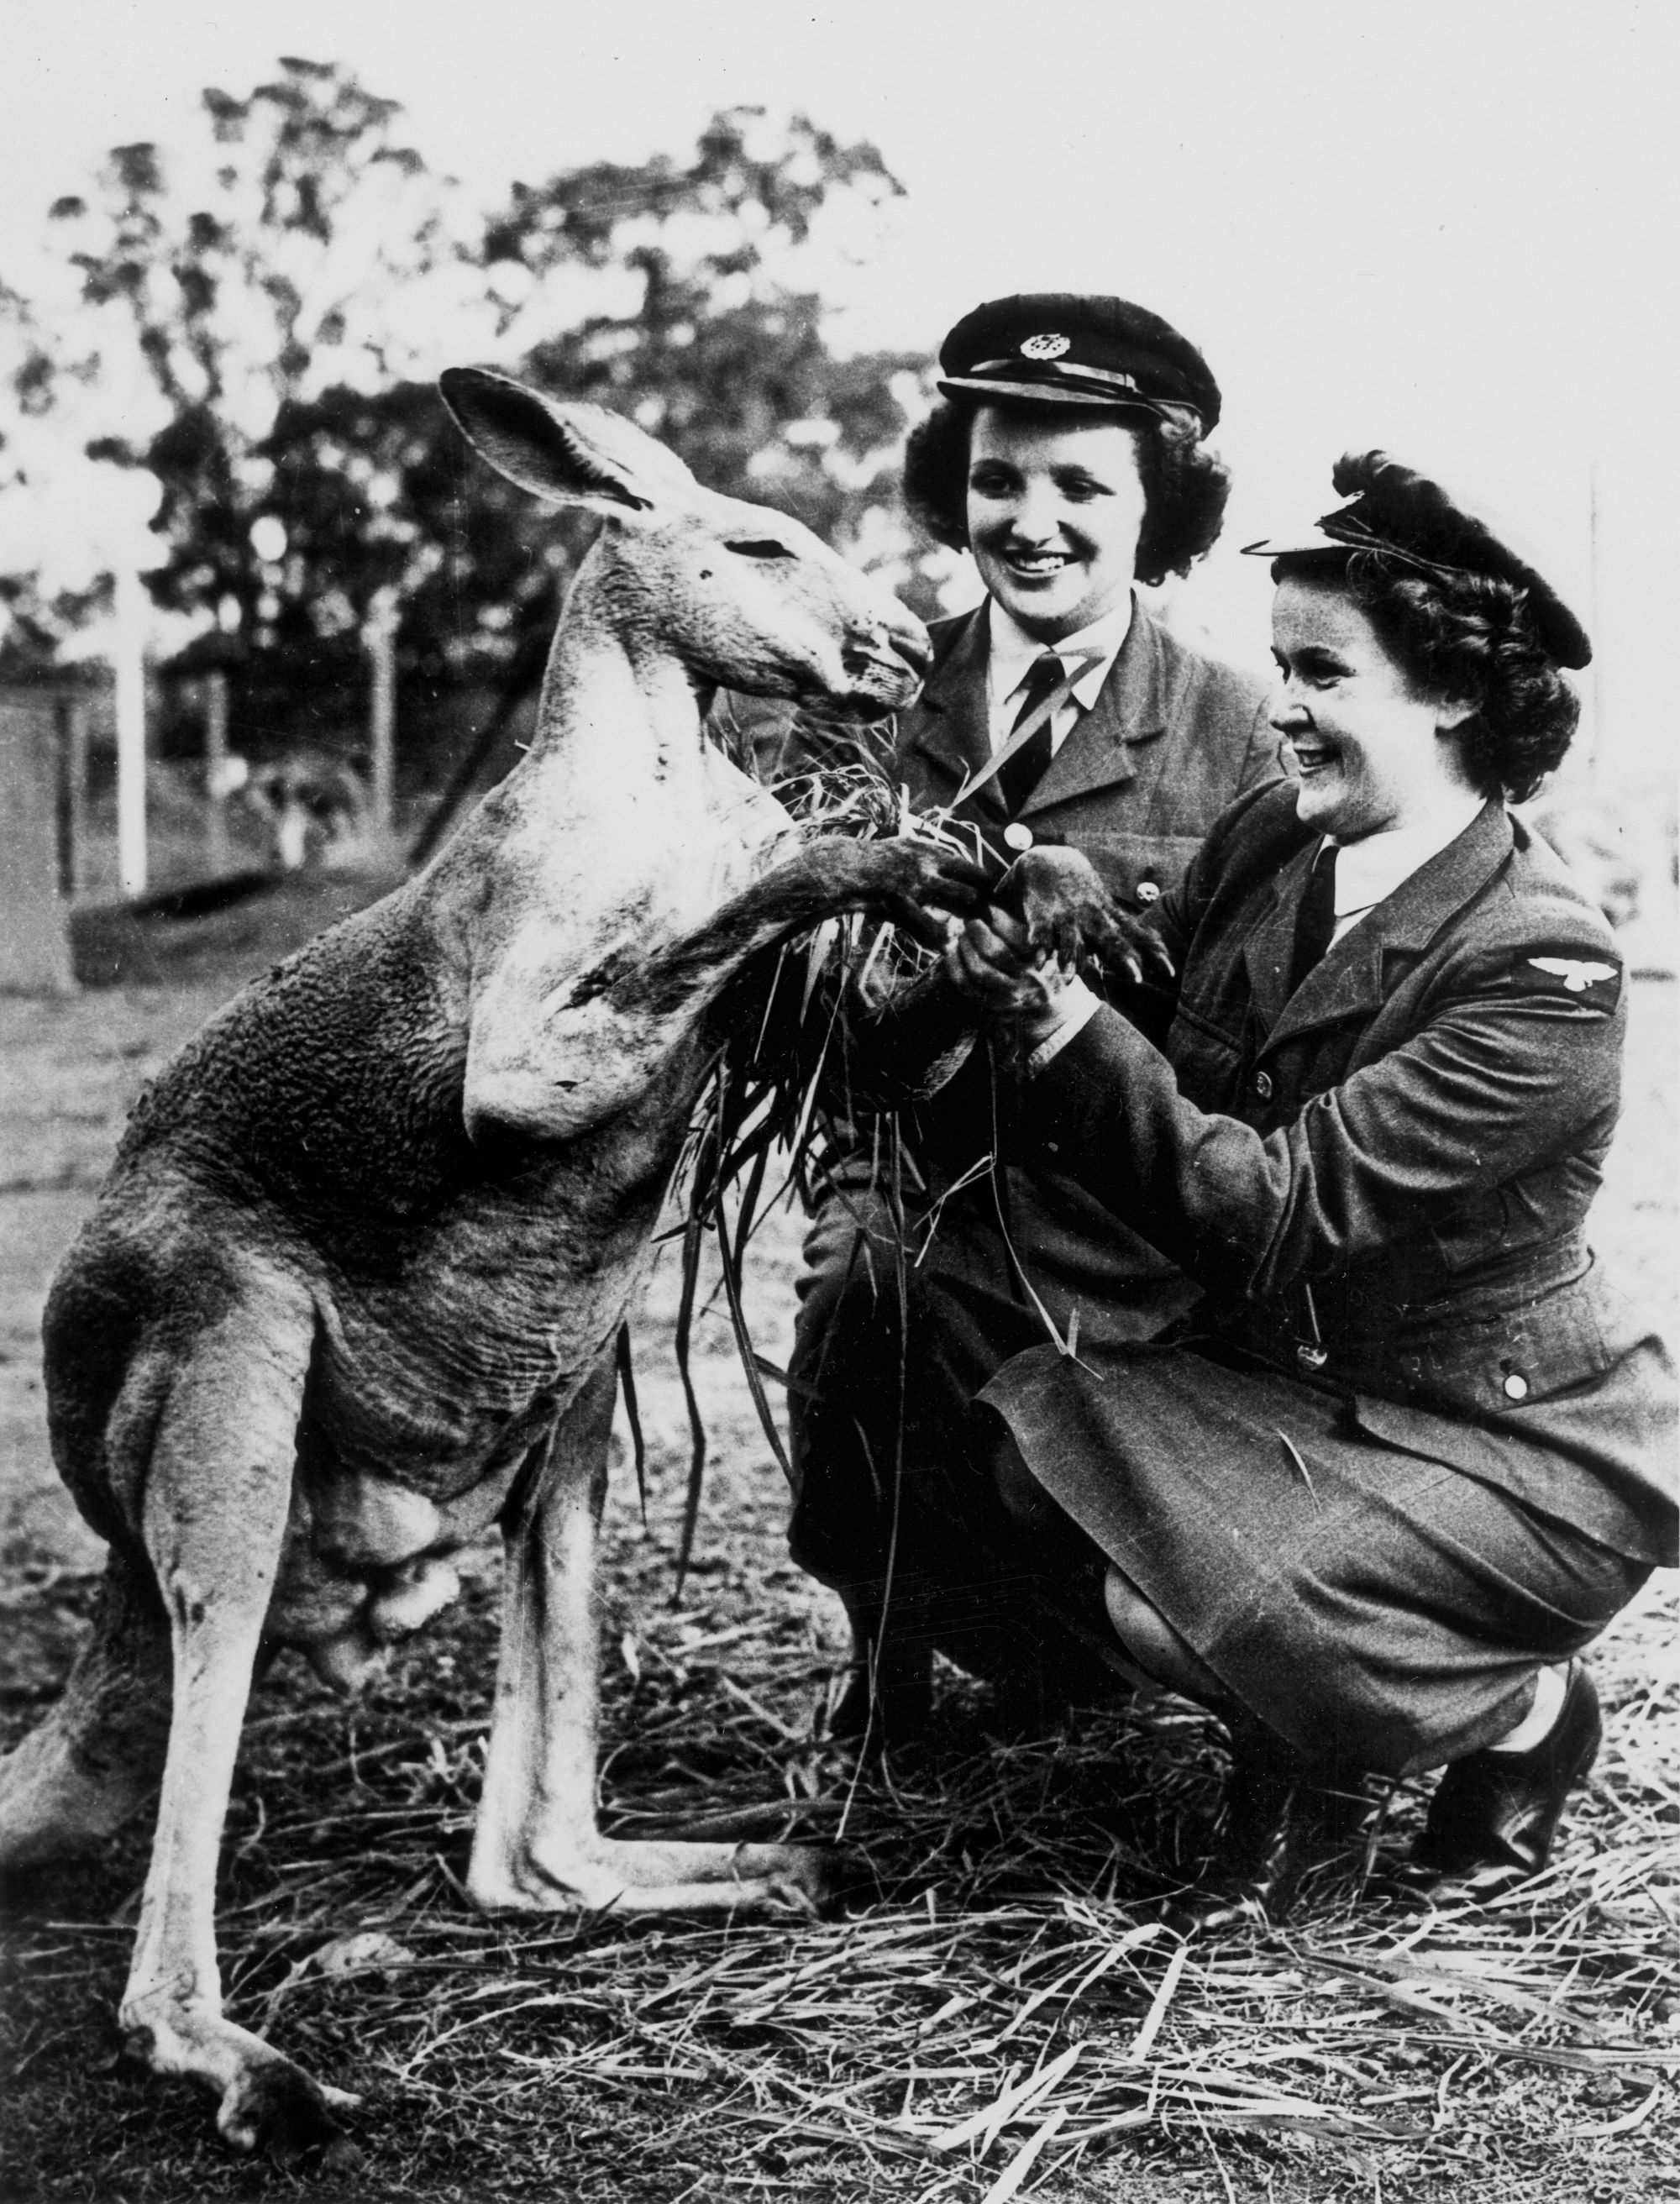 Two young ladies in their Women's Australian Air Force uniforms feed the kangaroo, Brisbane, ca. 1942